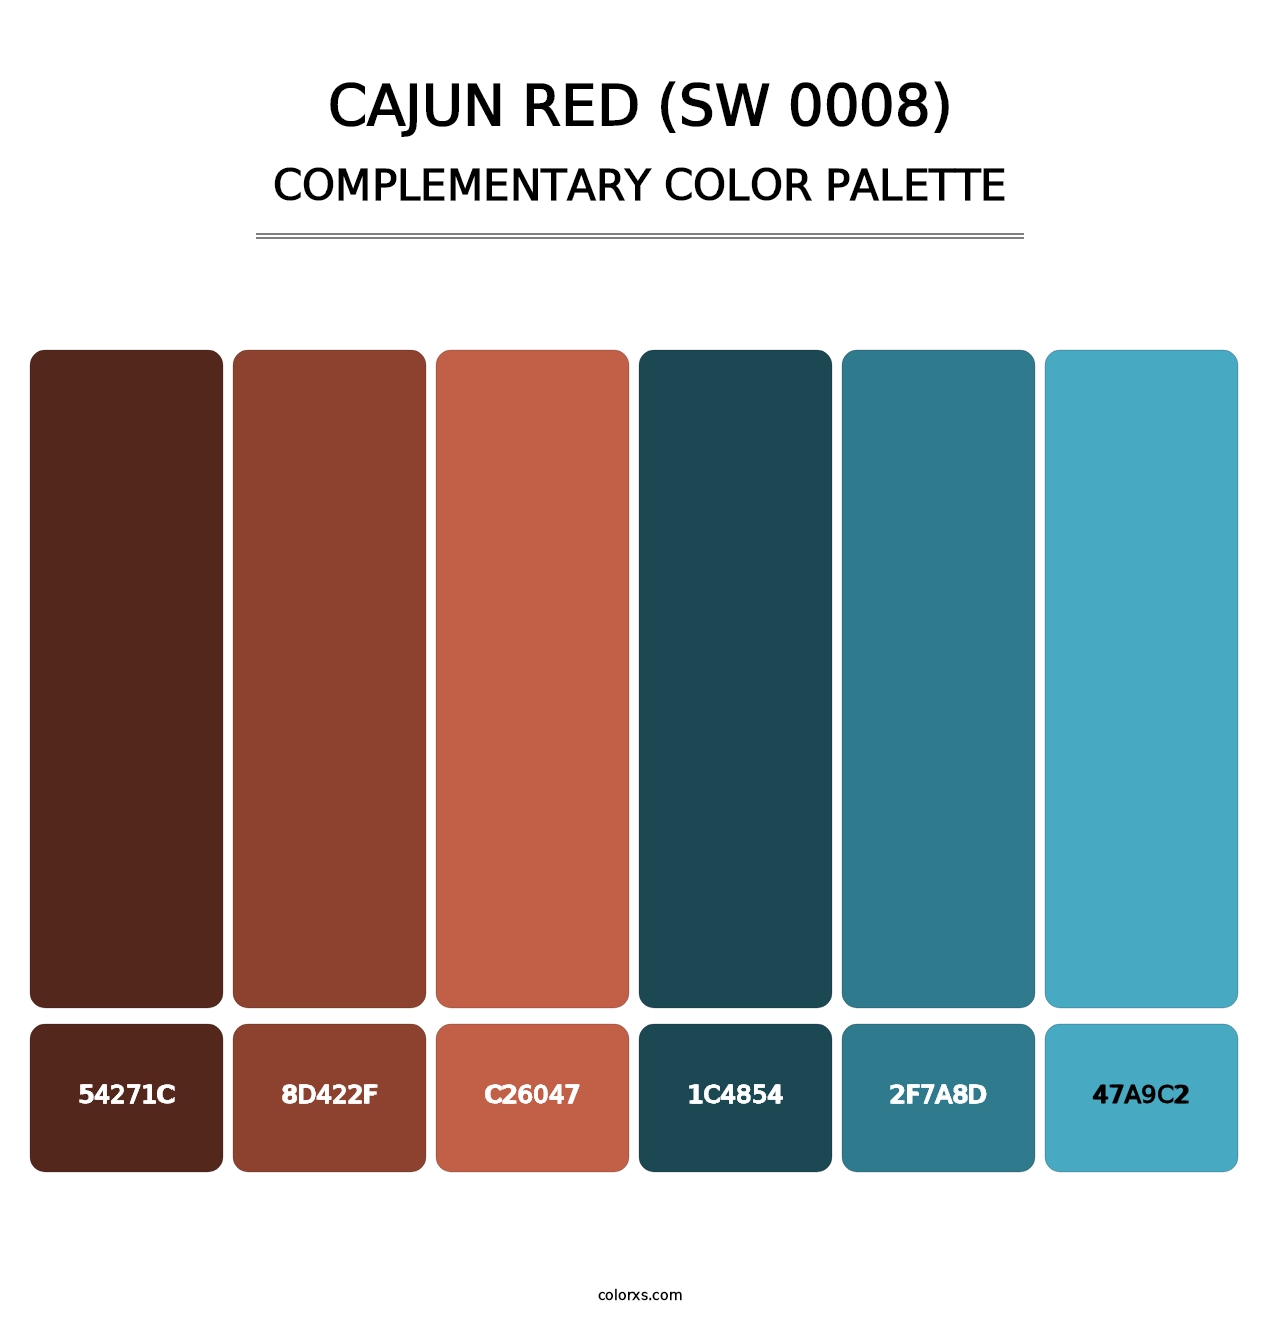 Cajun Red (SW 0008) - Complementary Color Palette